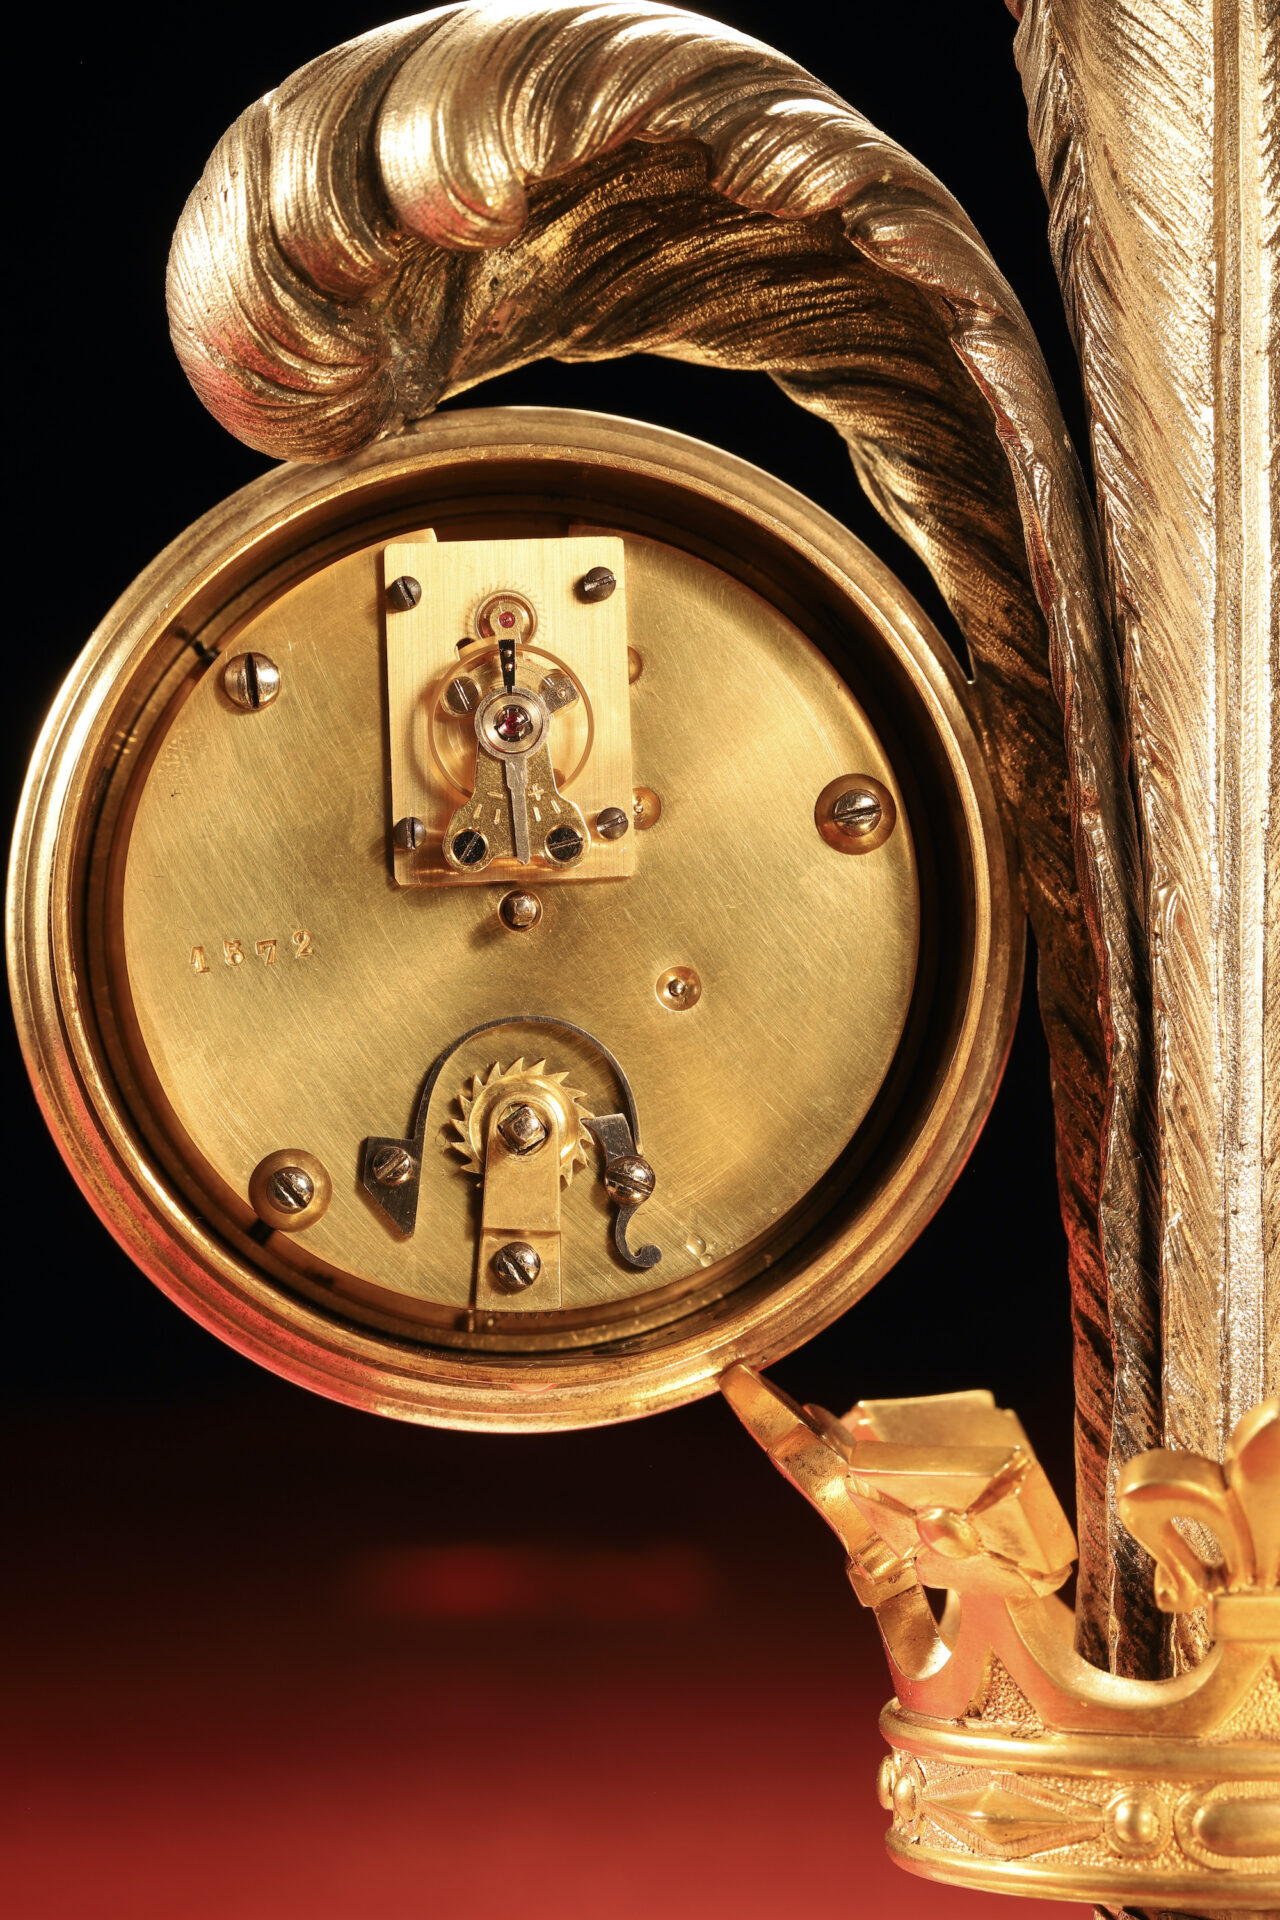 Close up of reverse of clock from Prince of Wales Feathers Desk Compendium c1880